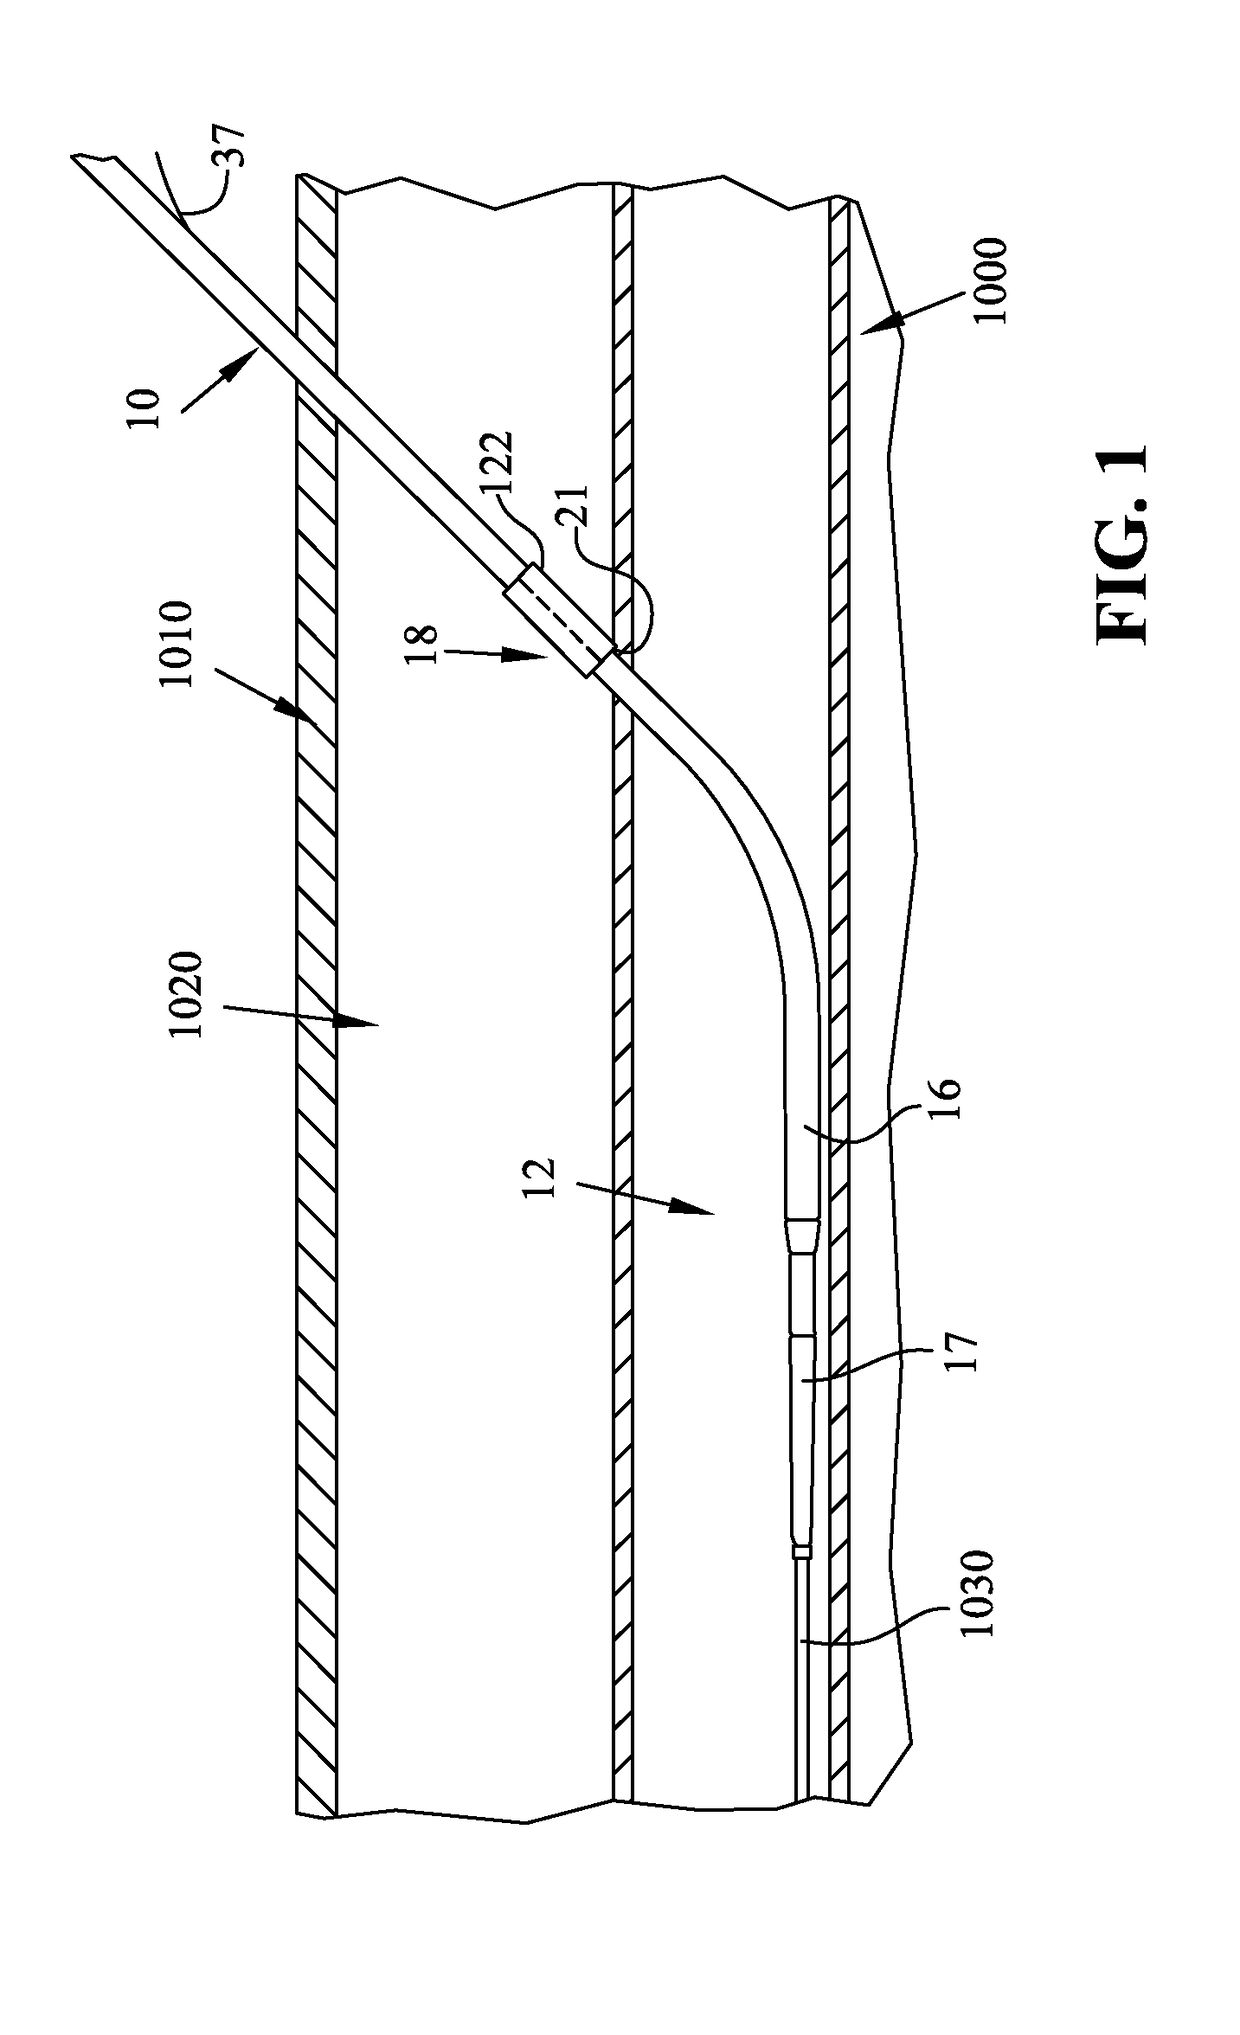 Method and apparatus for sealing access